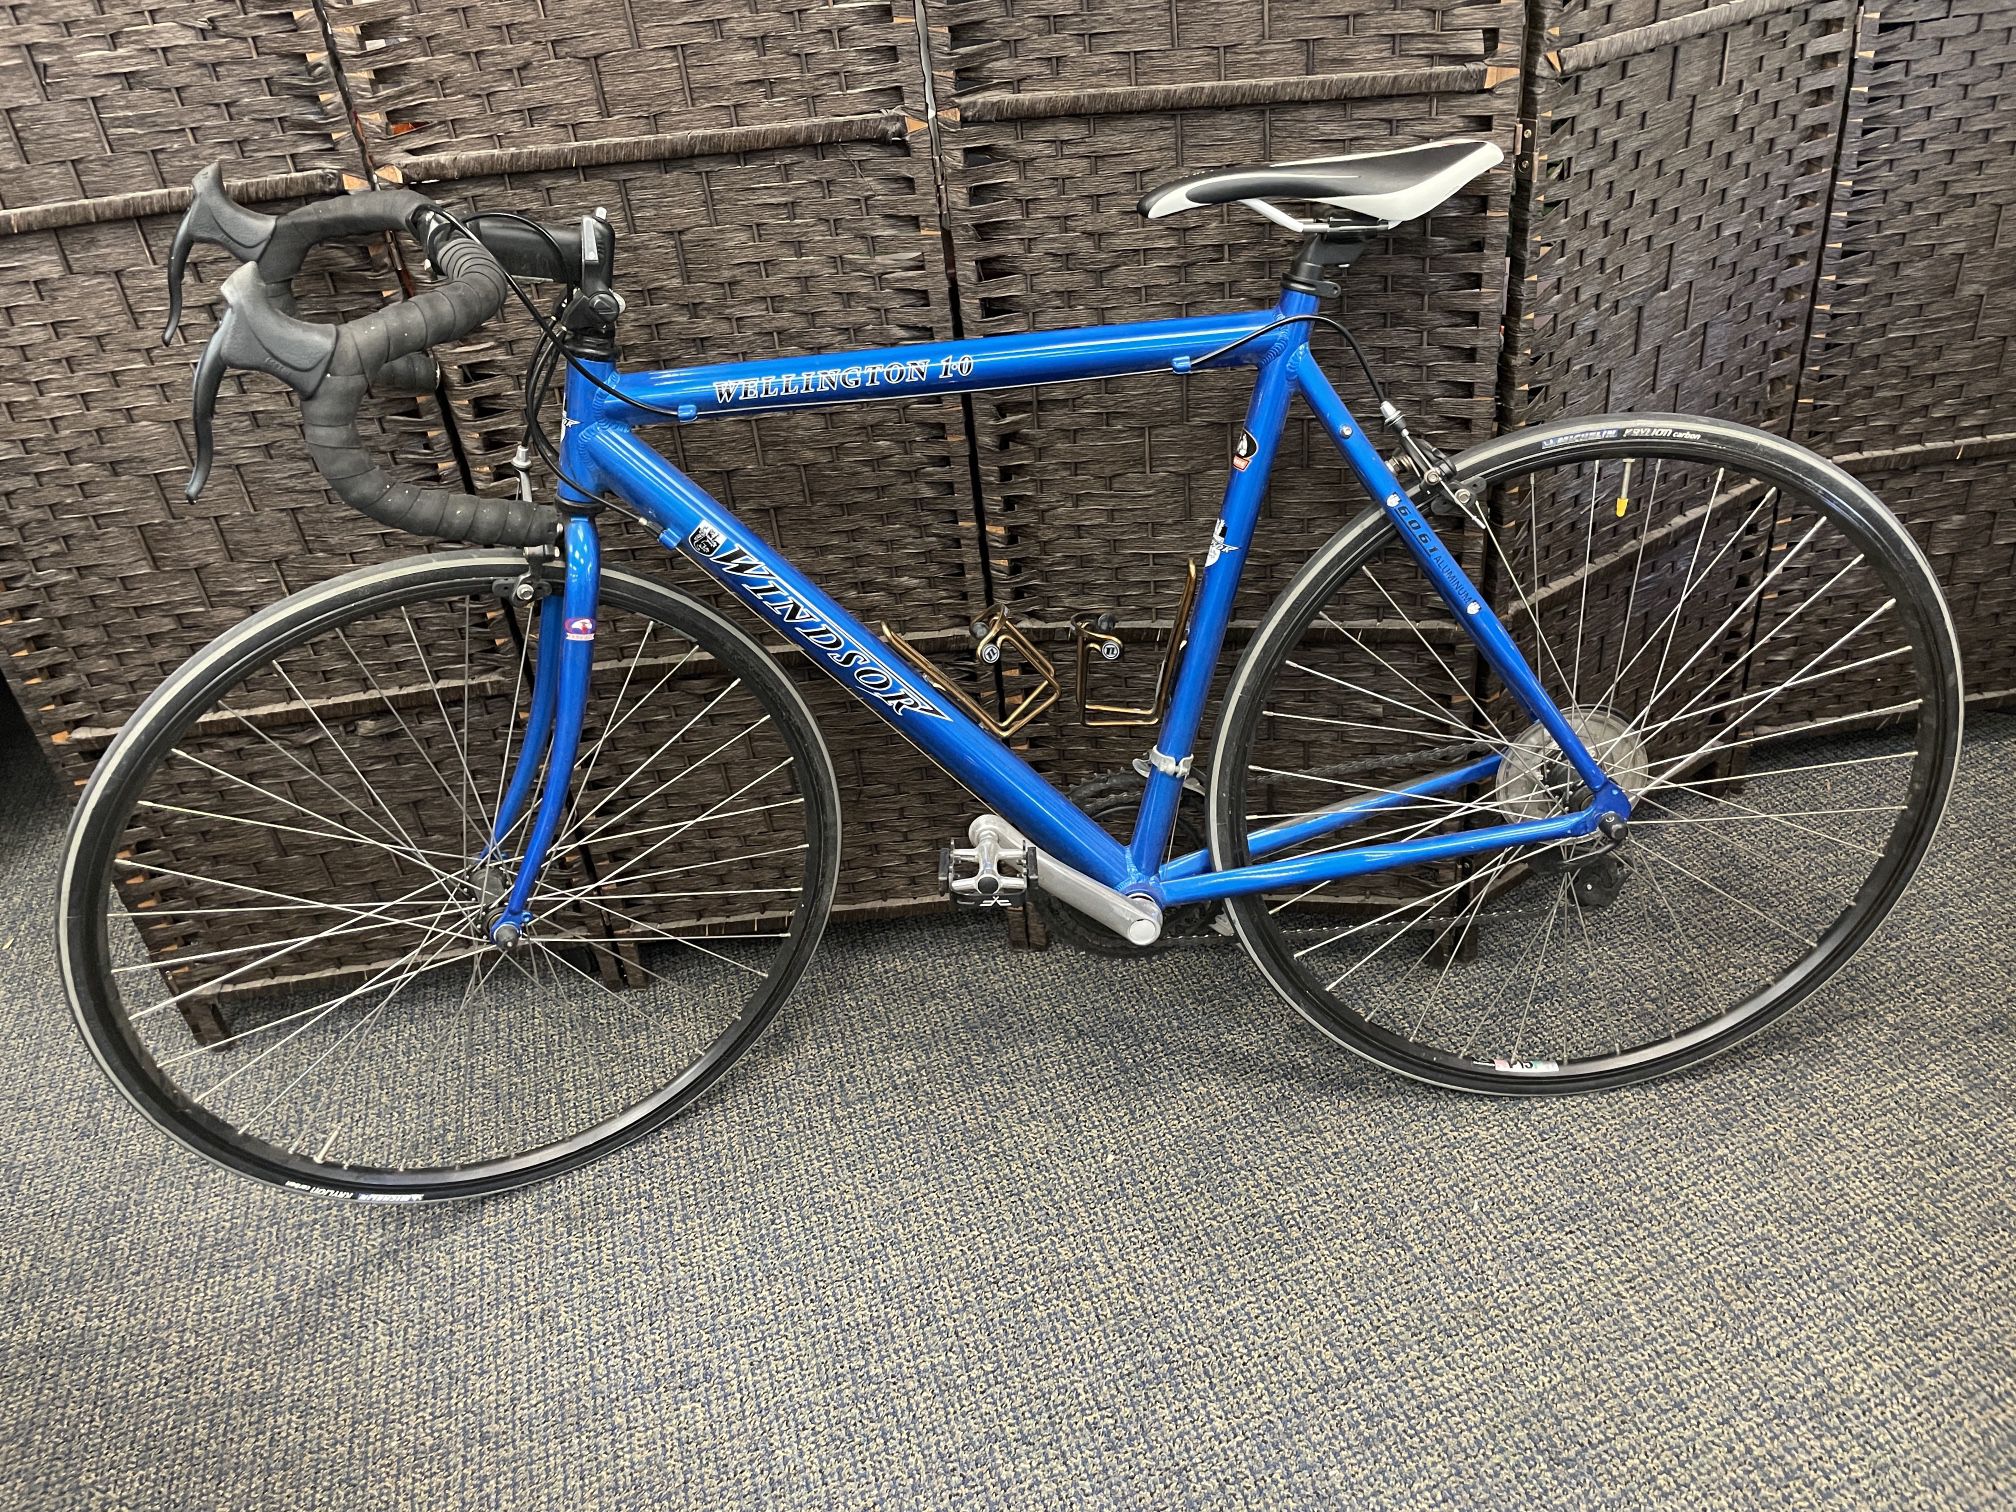 Windsor Road Bike, Wellington 1.0,   58cm, Excellent Condition, MSRP $699 Delivery Available 